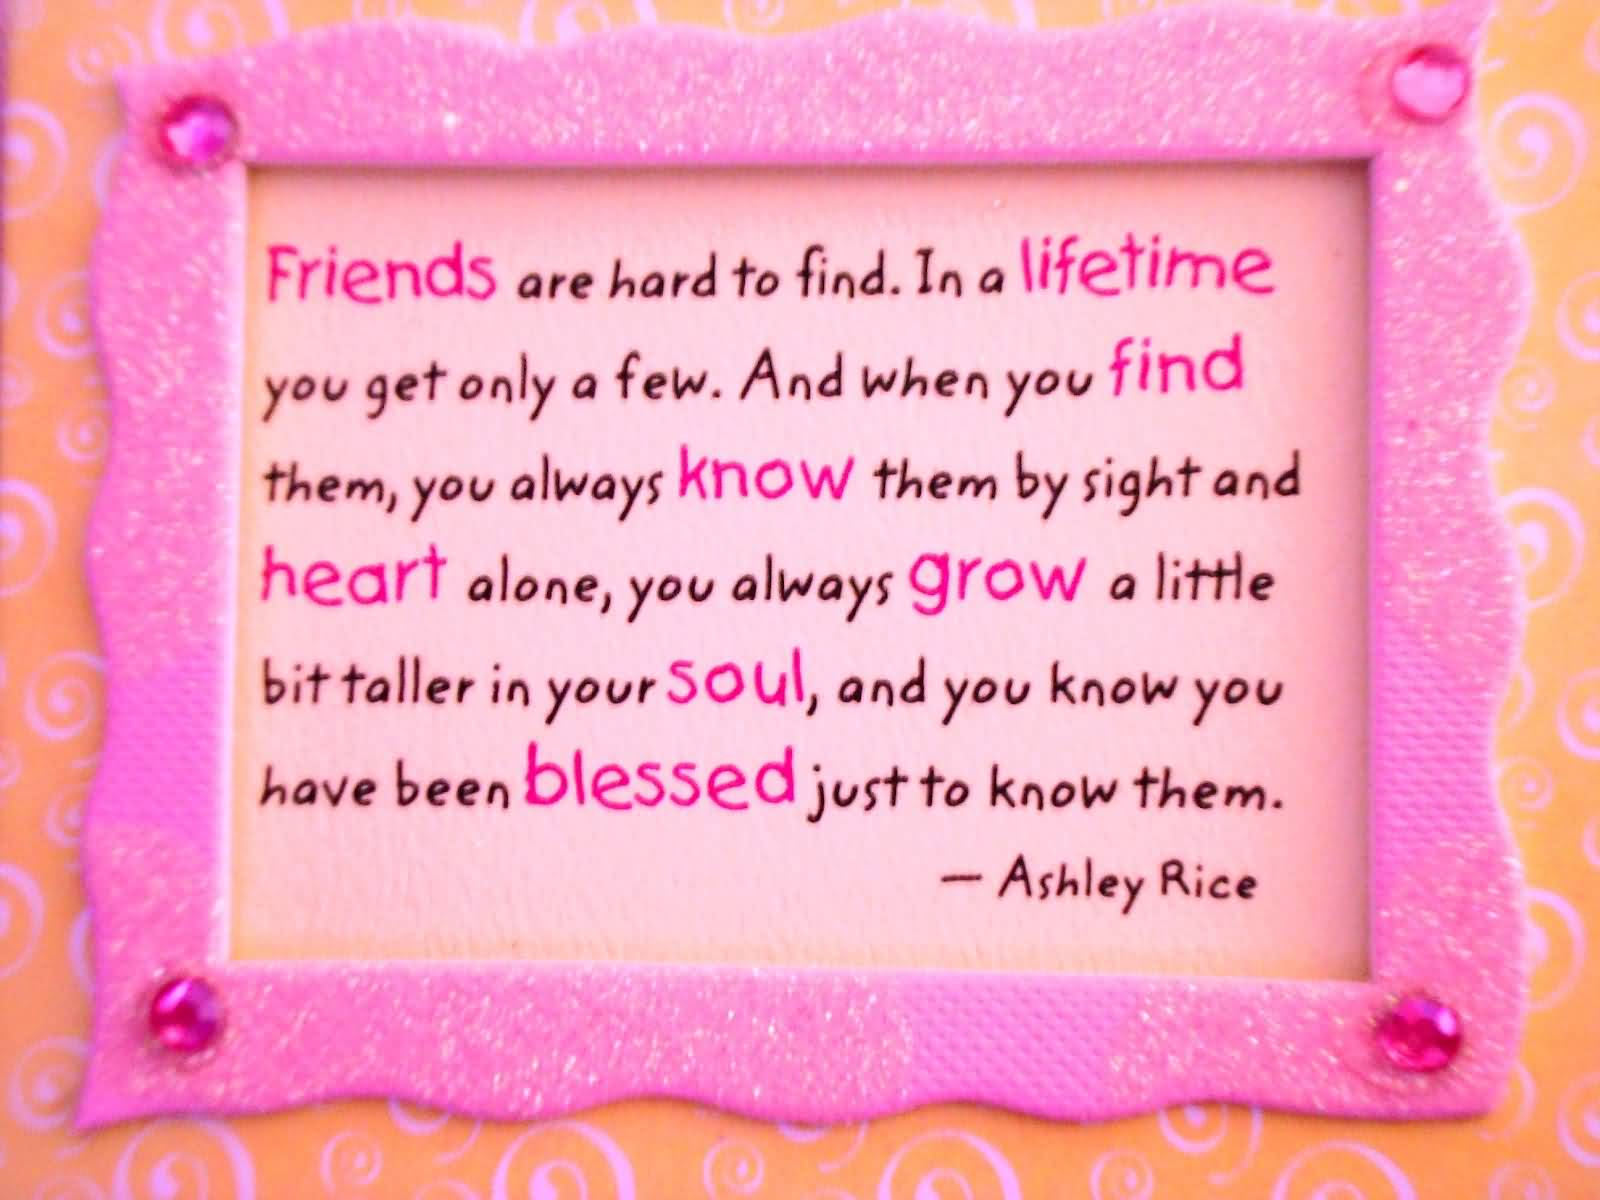 Friends are hard to find. In a lifetime you only get a few. And when you find them, you always know them by sight and heart alone, you always grow a little bit taller in your soul, and you know you have been blessed just to know them.